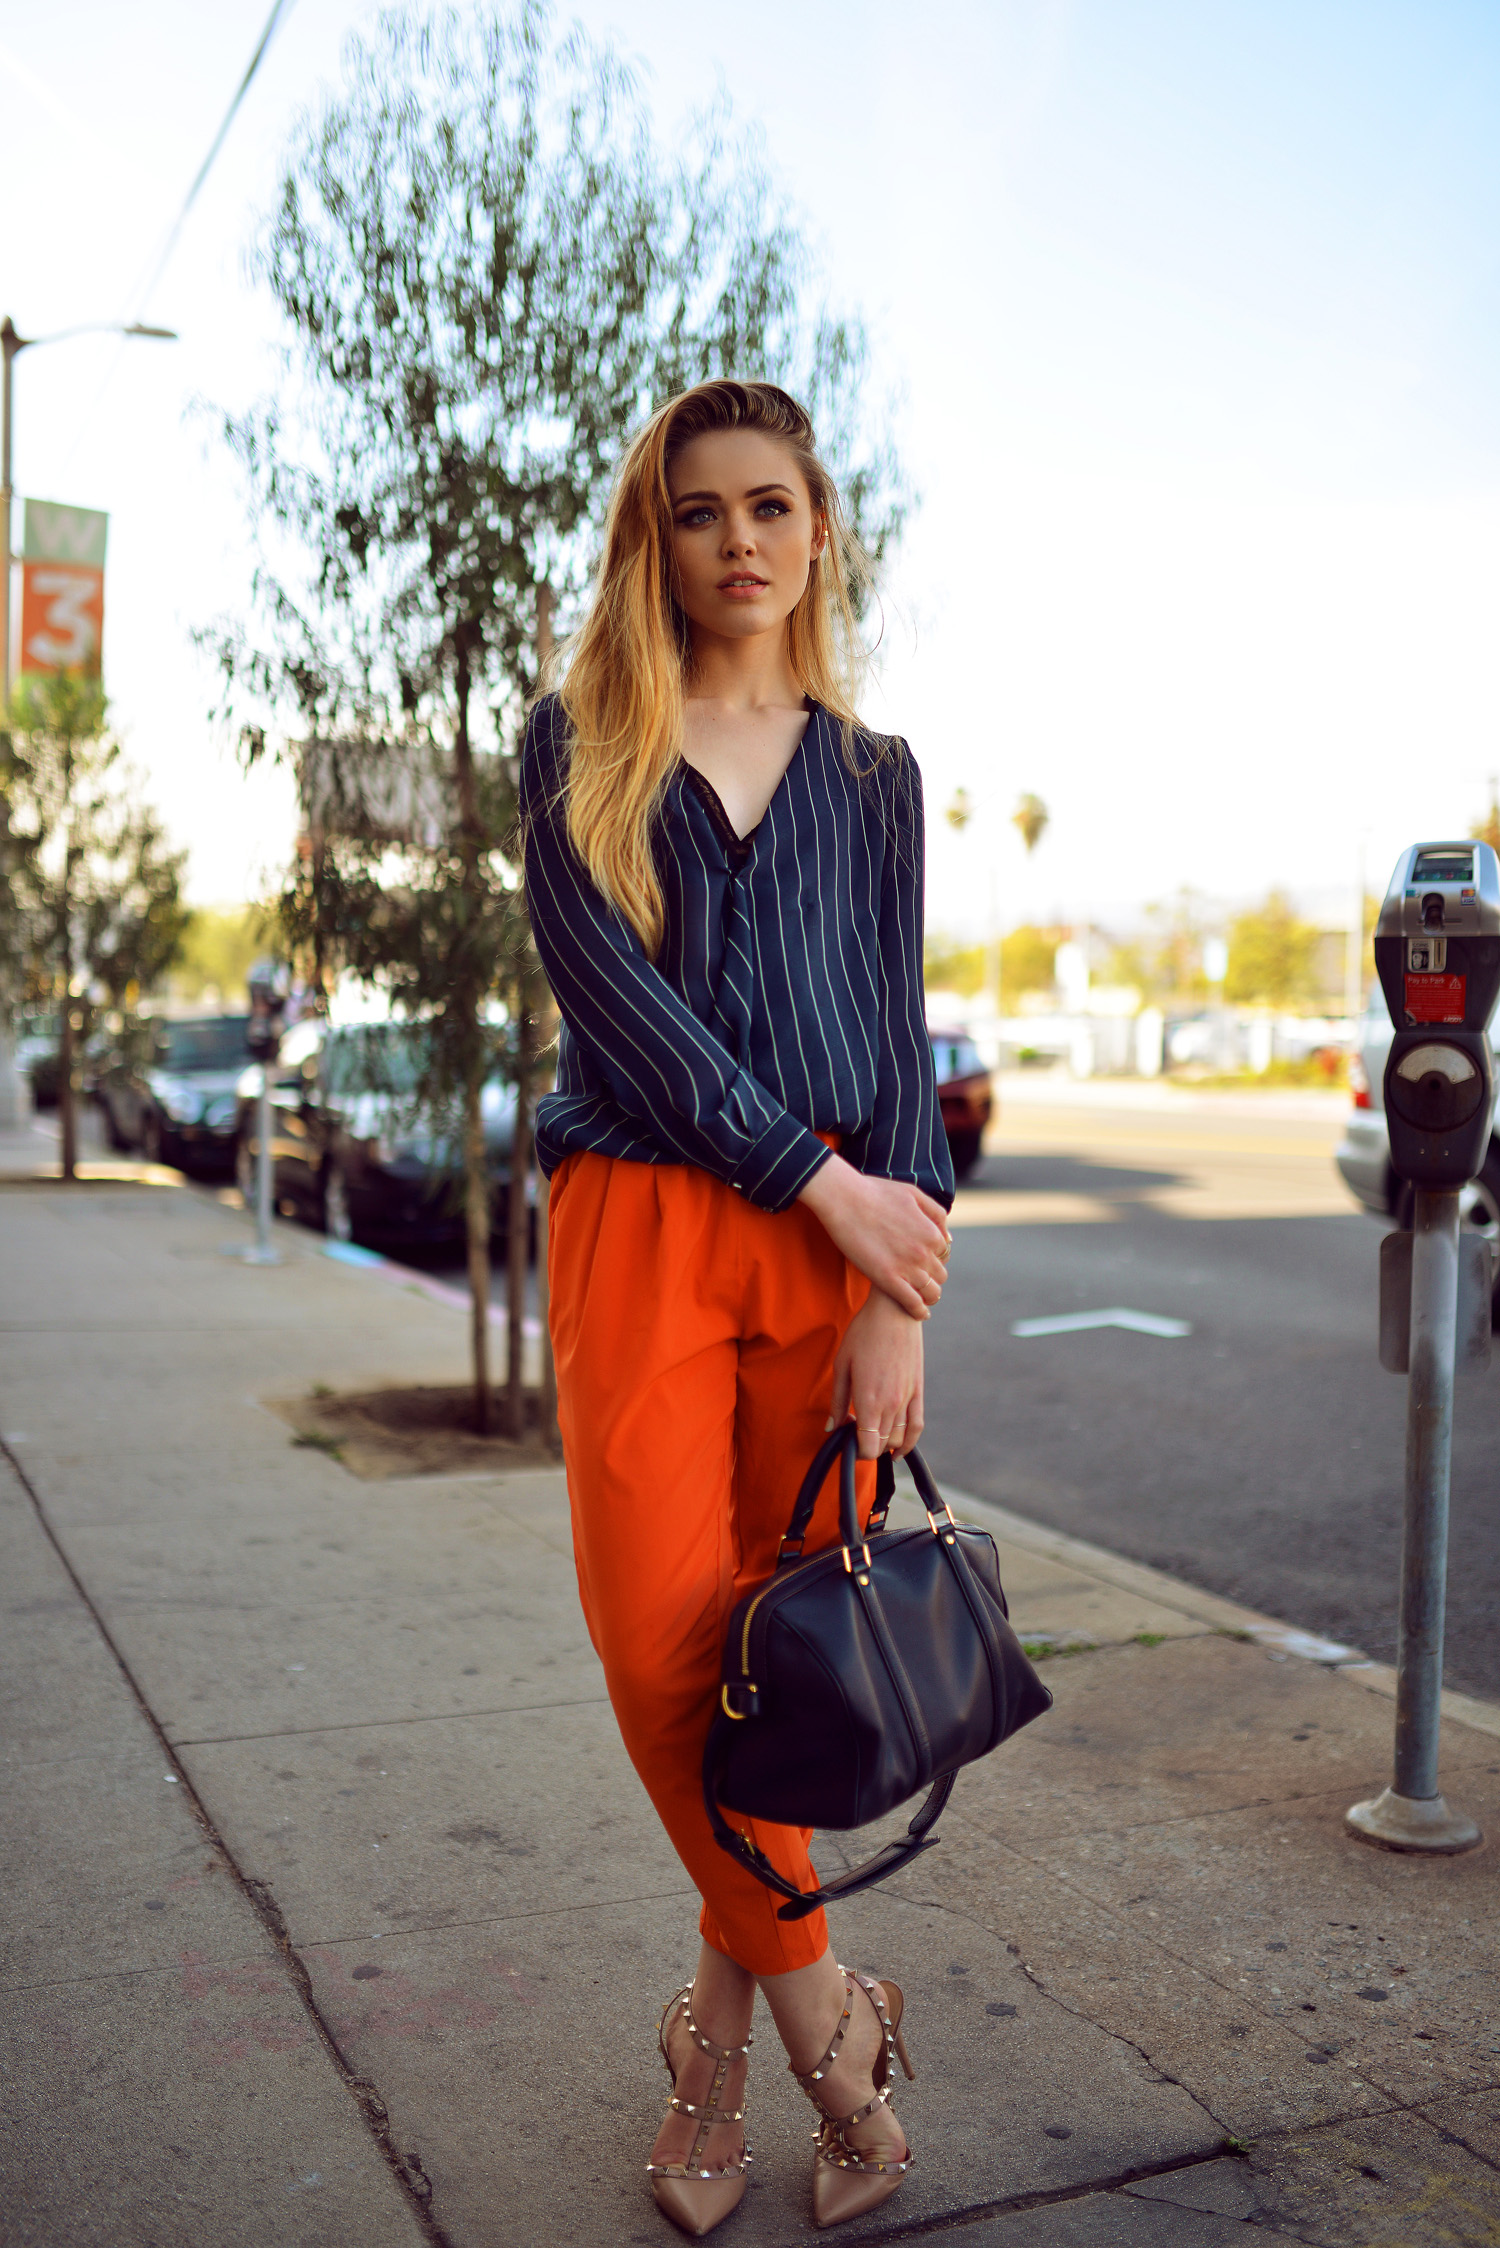 Kristina Bazan   a blogger with a great sense of style